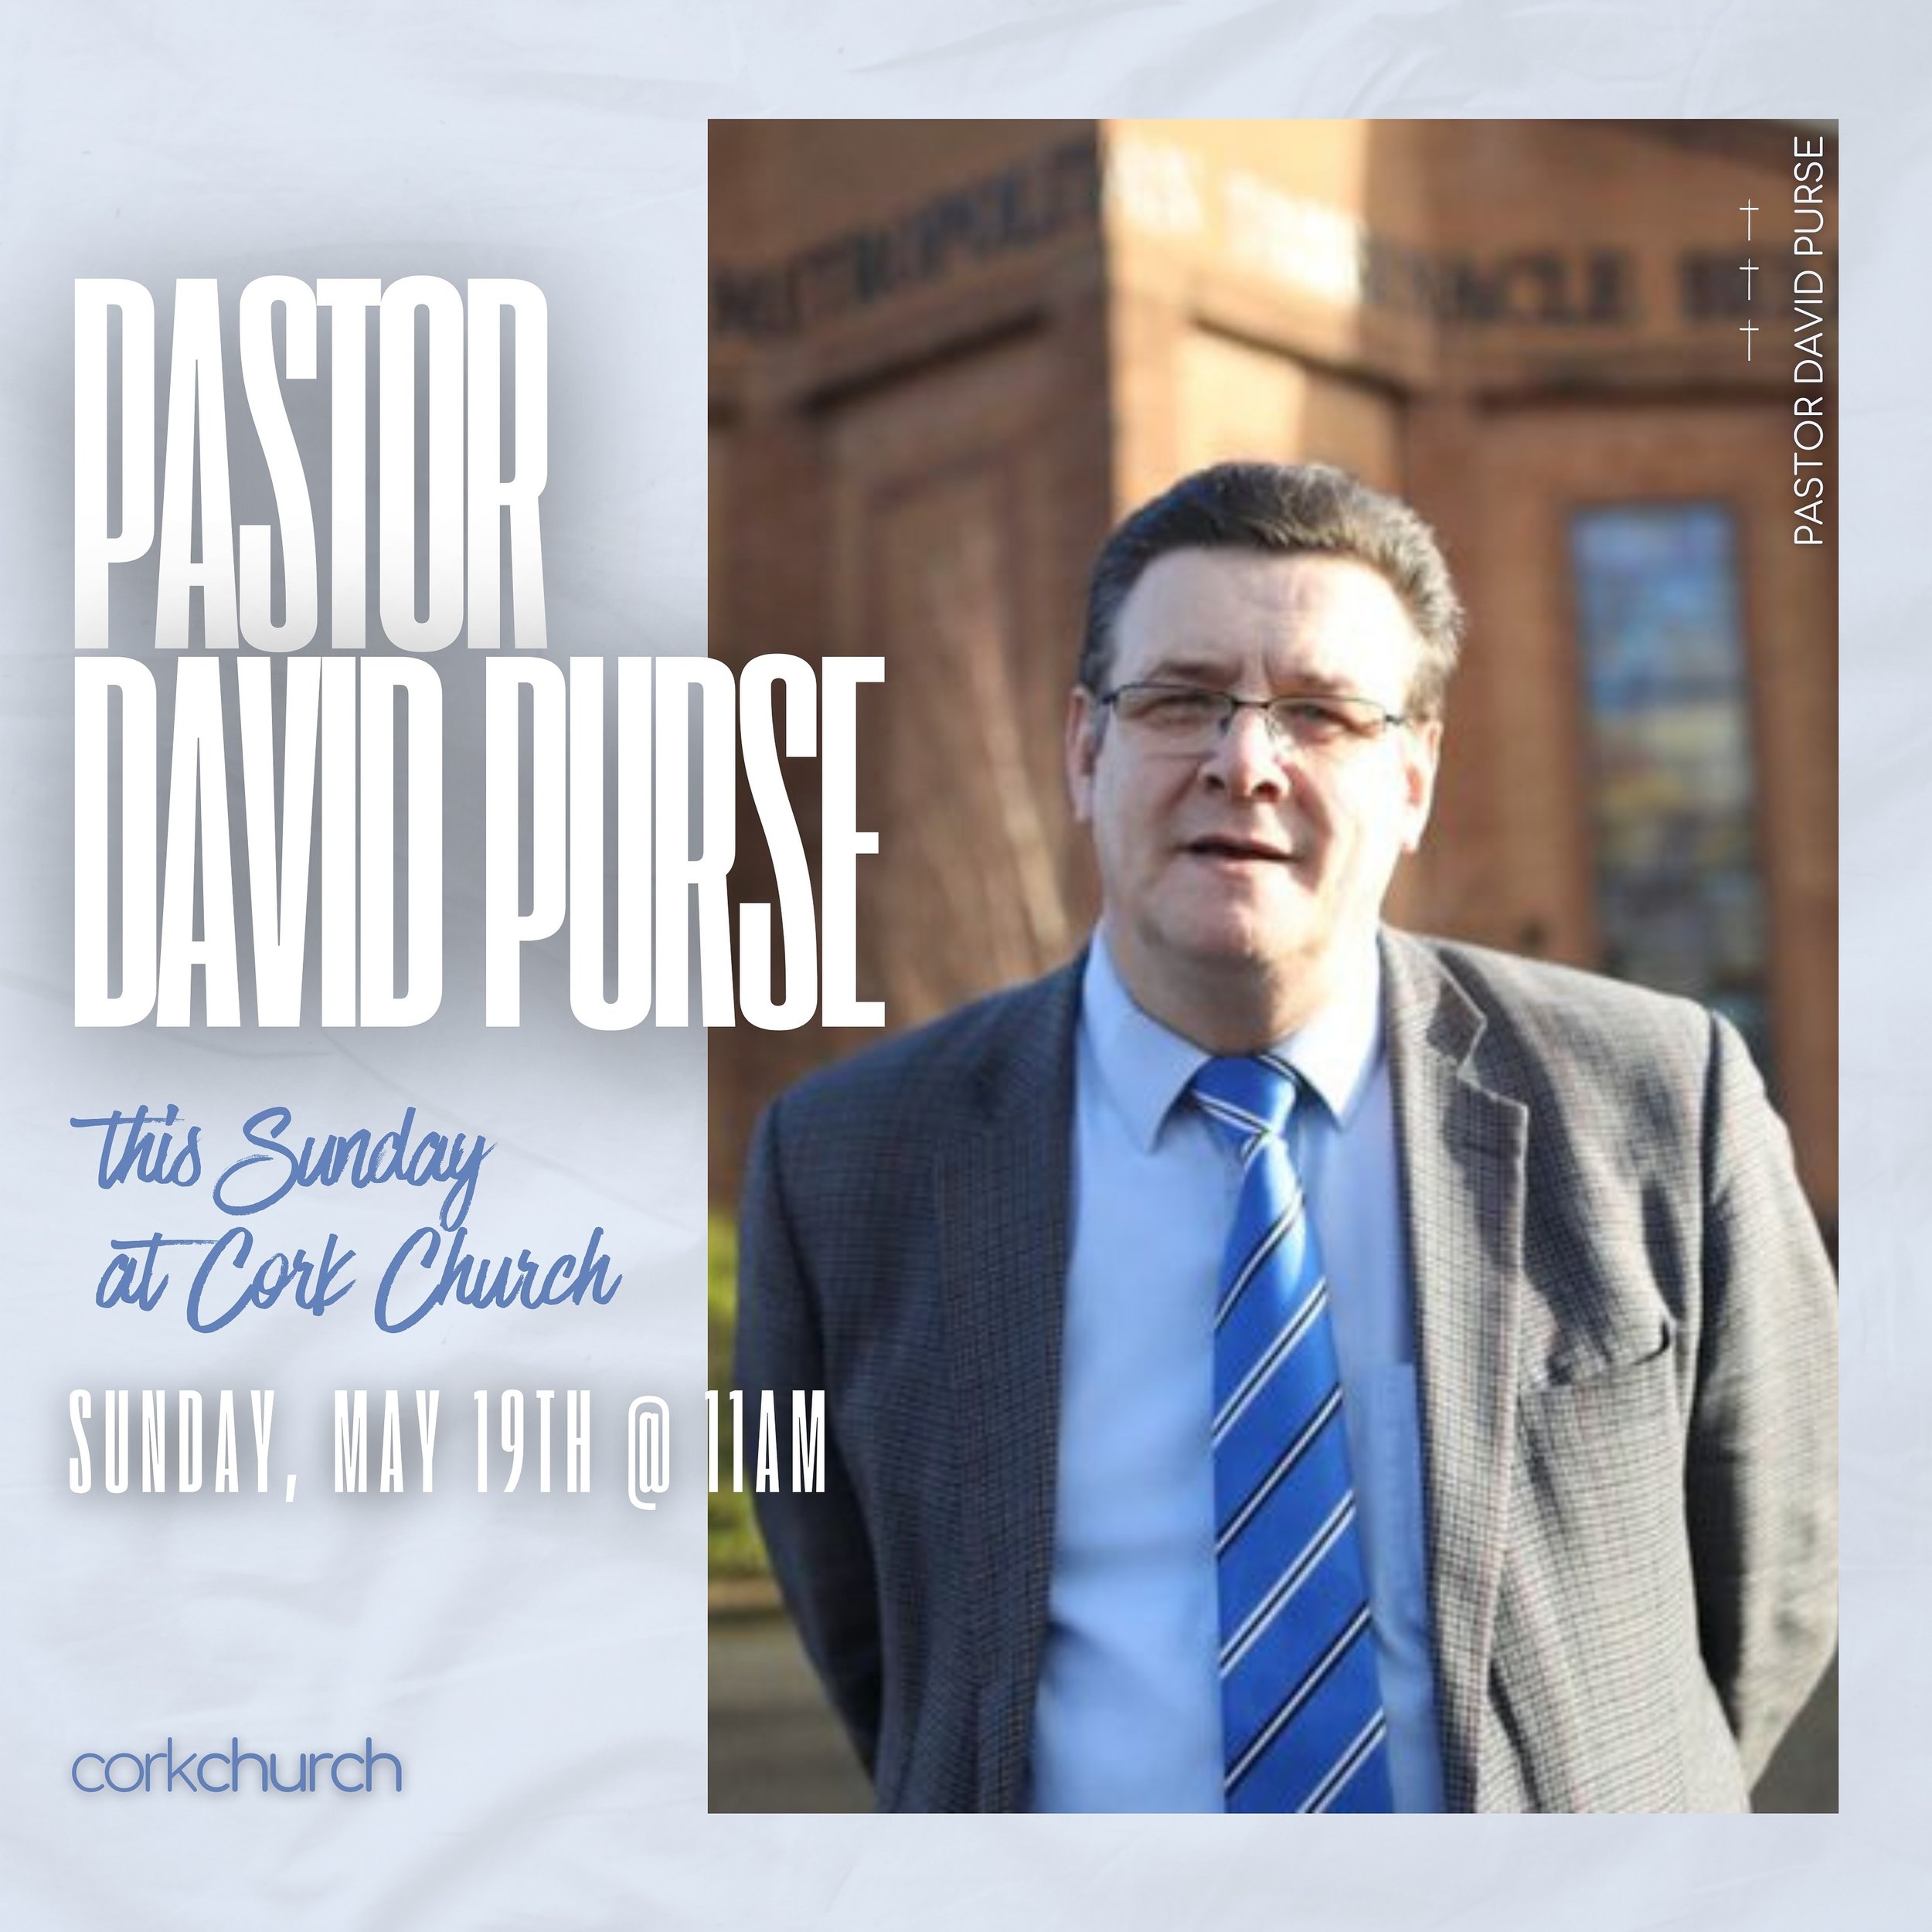 Join us tomorrow - we&rsquo;re saving a seat for you!

We have Pastor David Purse from @whitewellchurch in Belfast joining us to bring a great Word. We know you will be blessed! Tag a friend &amp; invite them along. God is doing amazing things at Cor